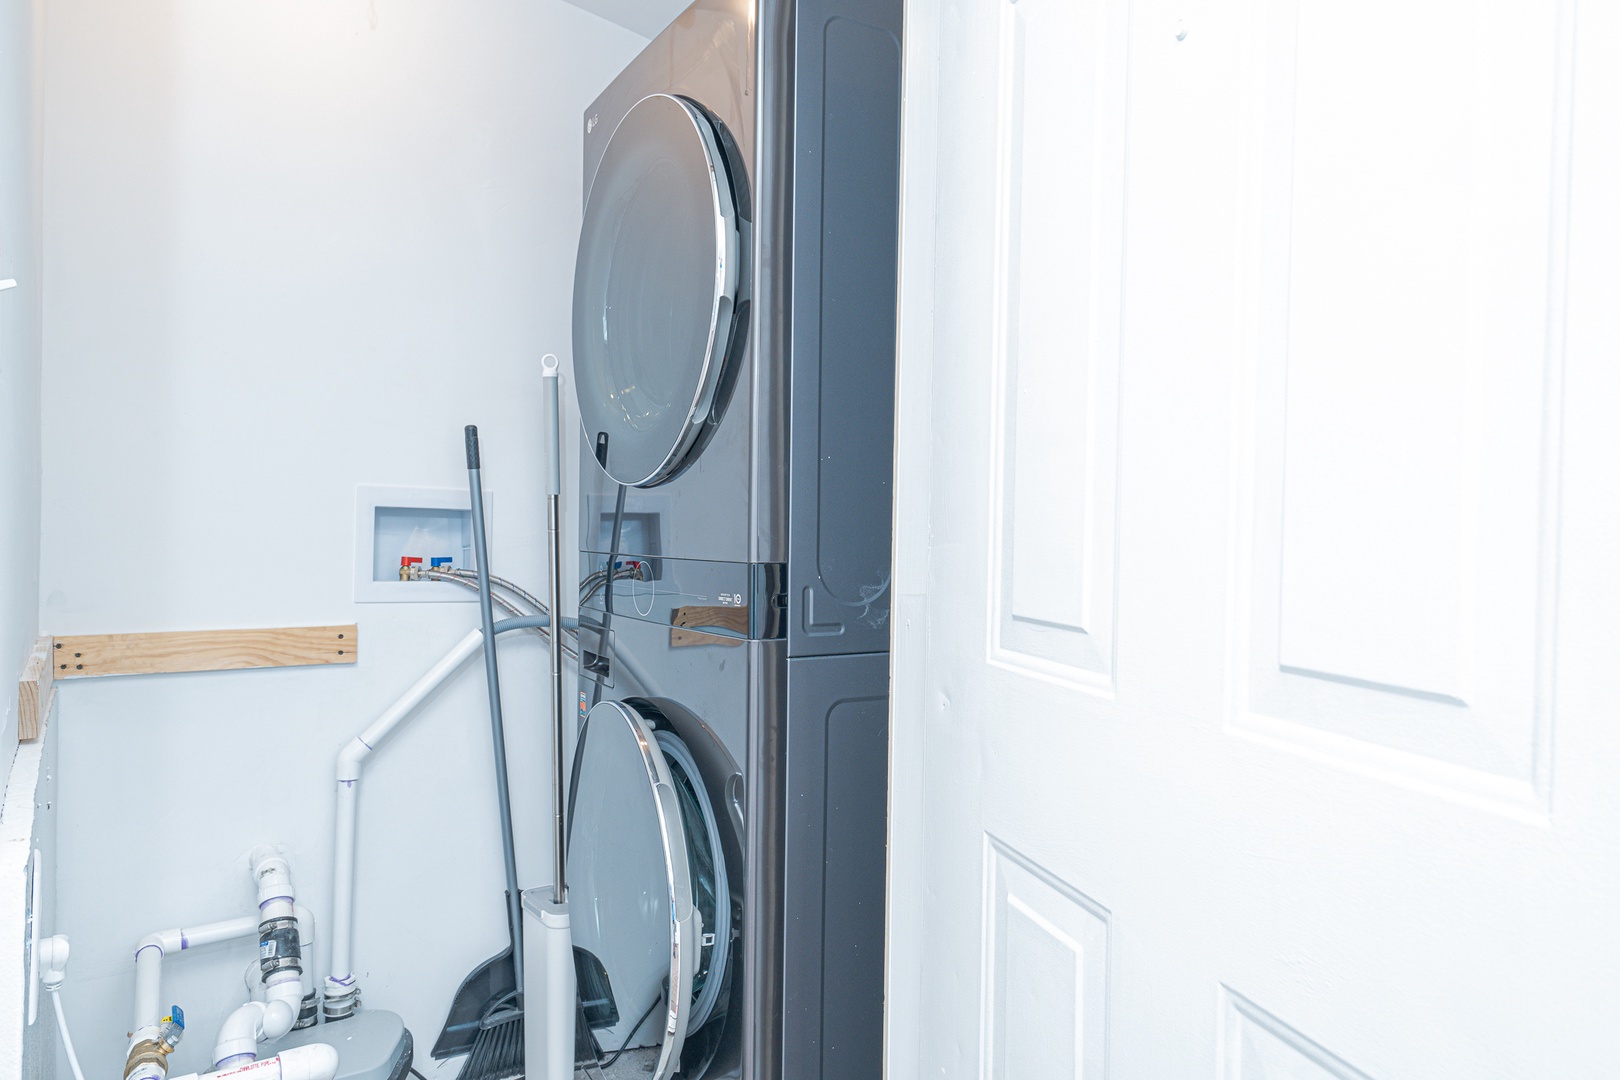 Private laundry is available for your stay, tucked away in a convenient closet